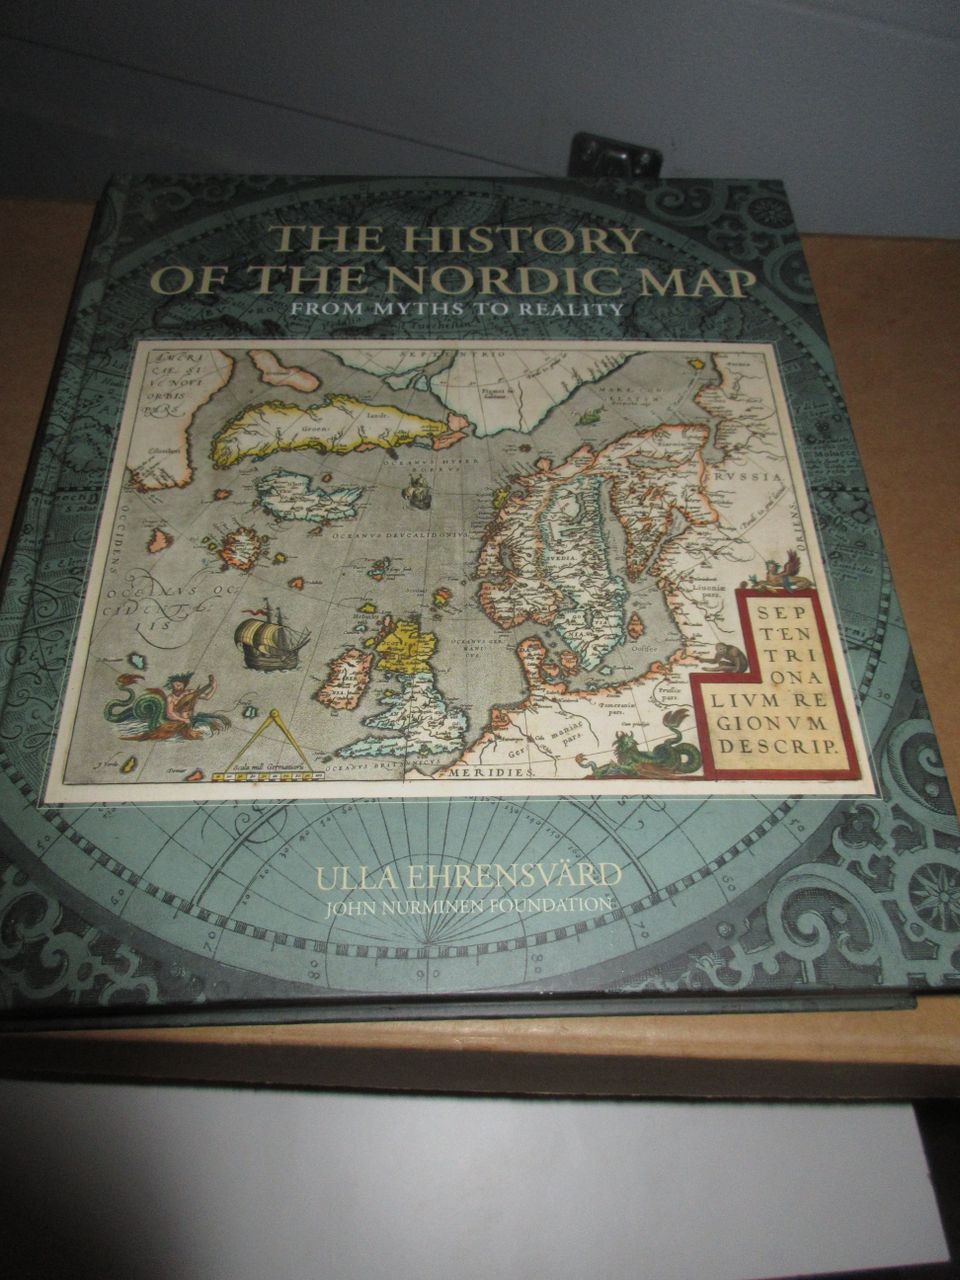 The History of the Nordic Map